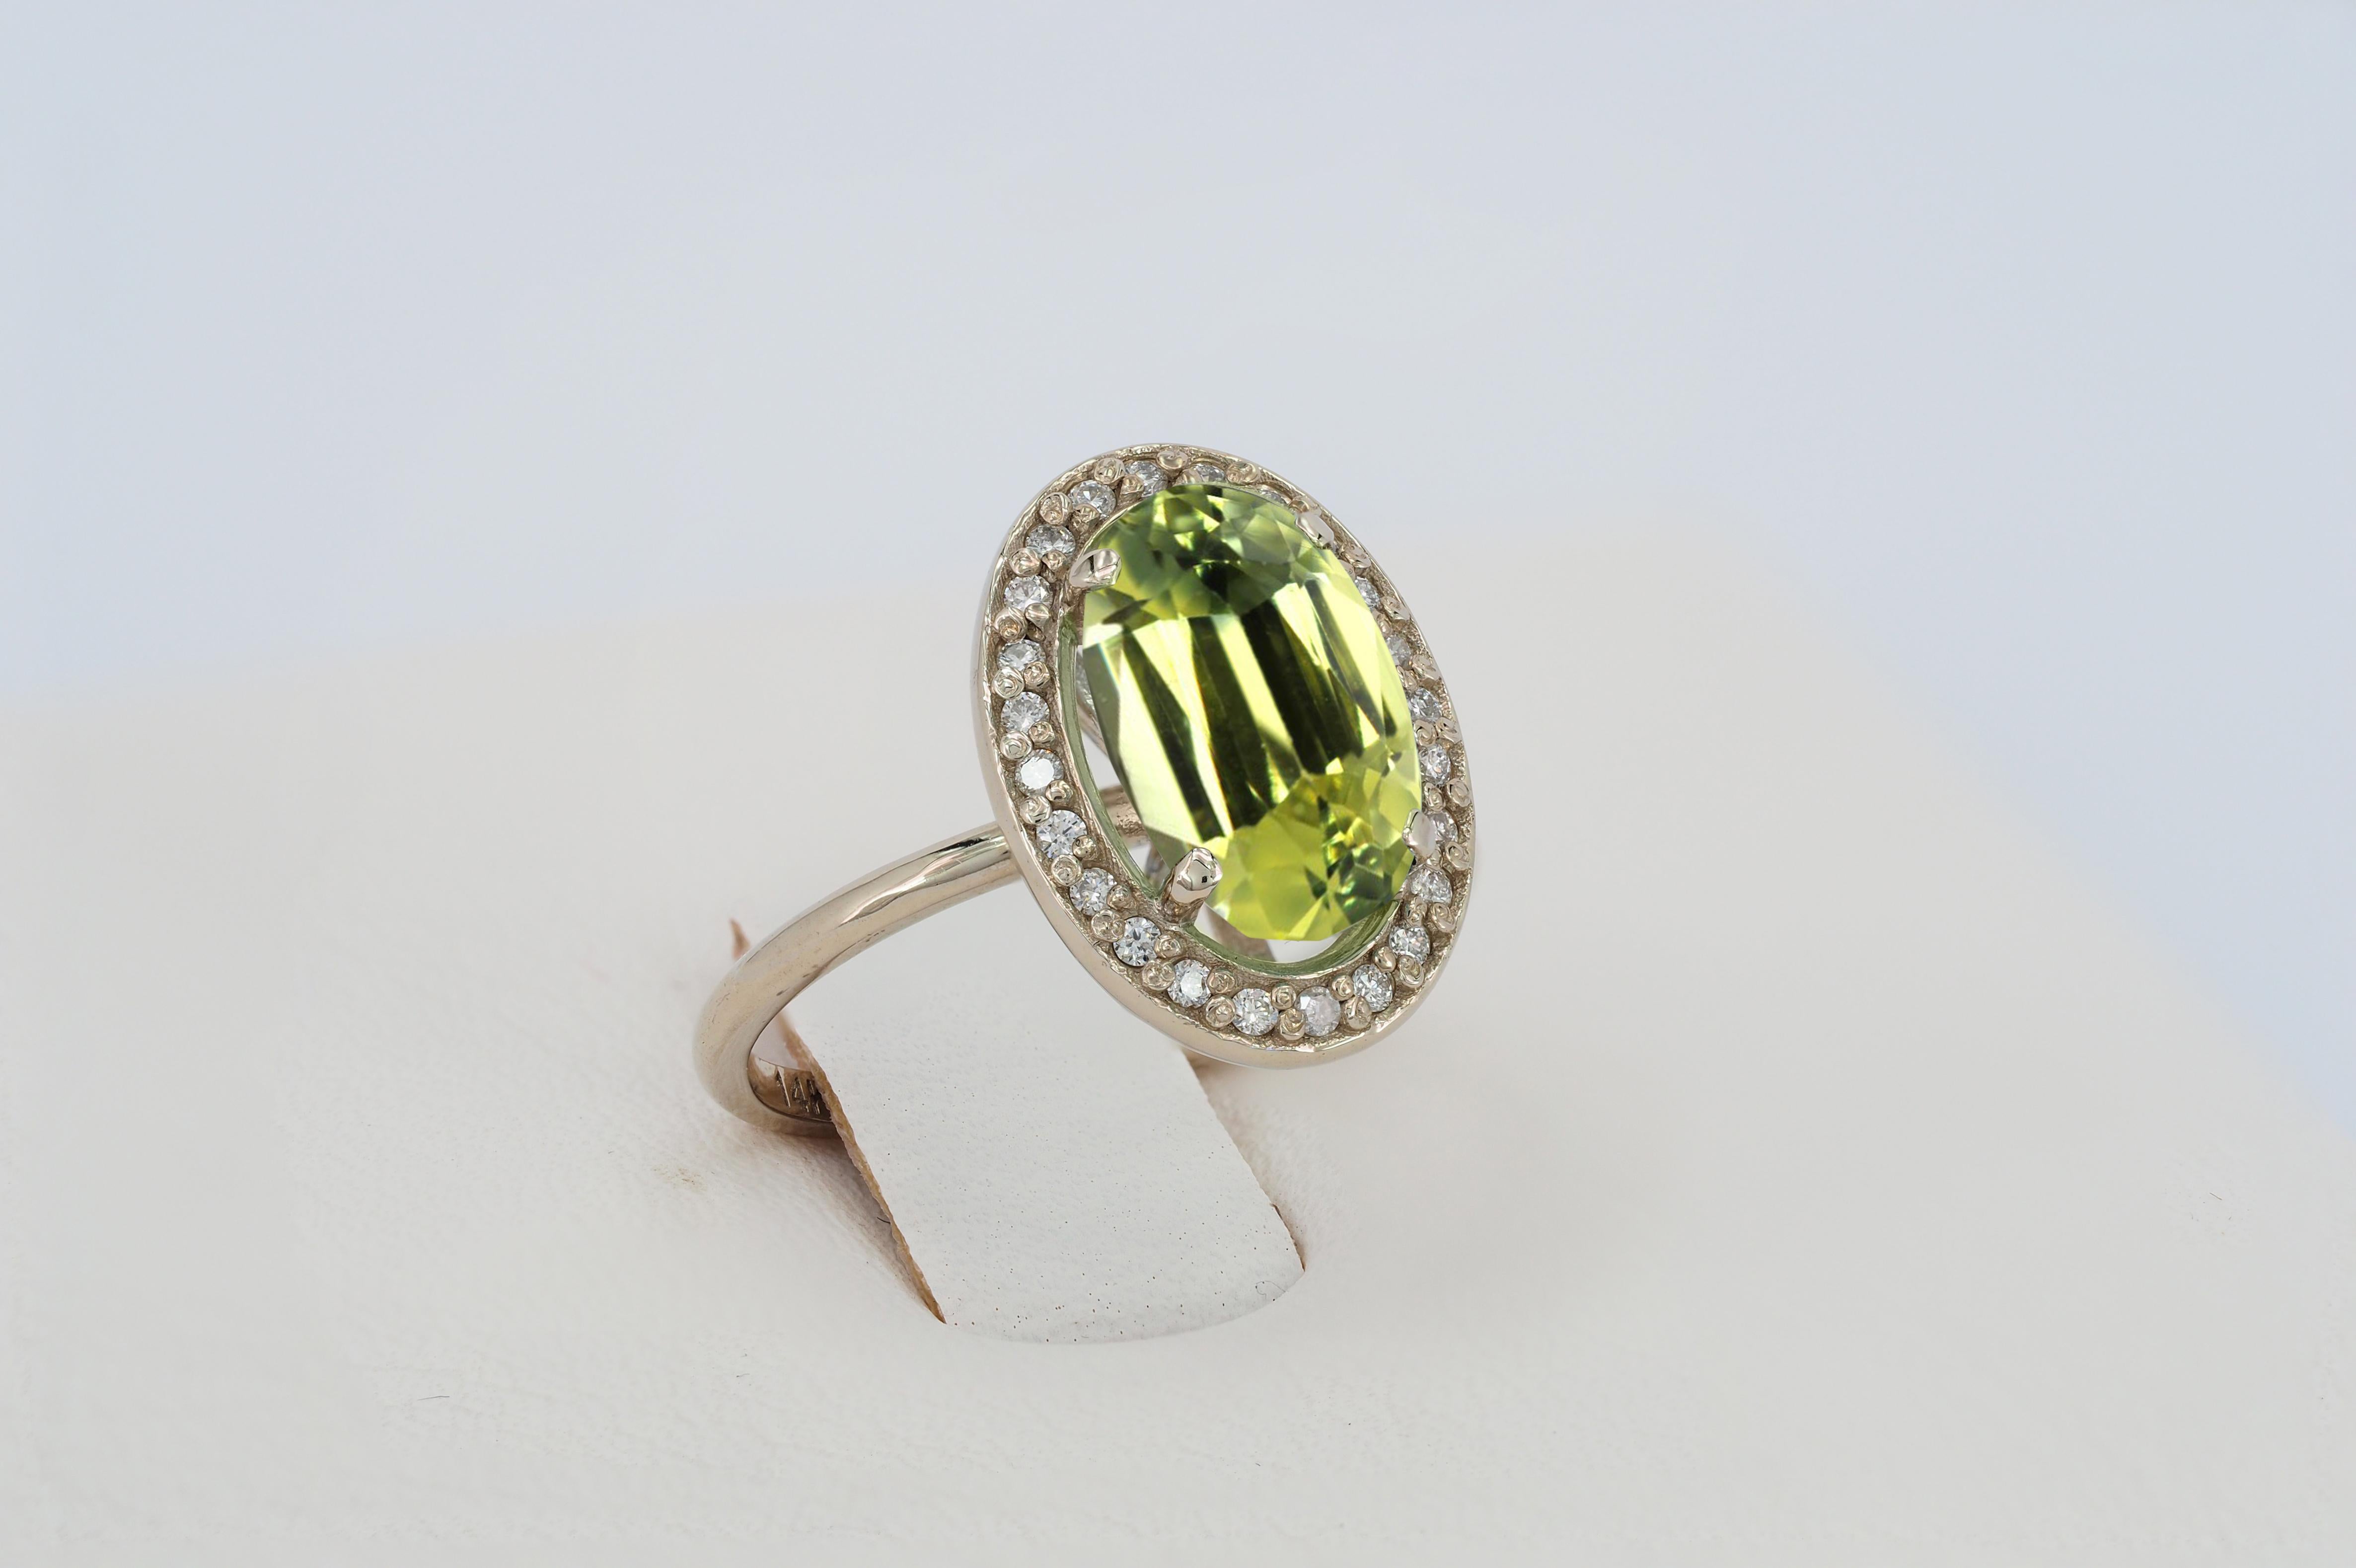 For Sale:  Peridot and diamonds 14k gold ring. 8